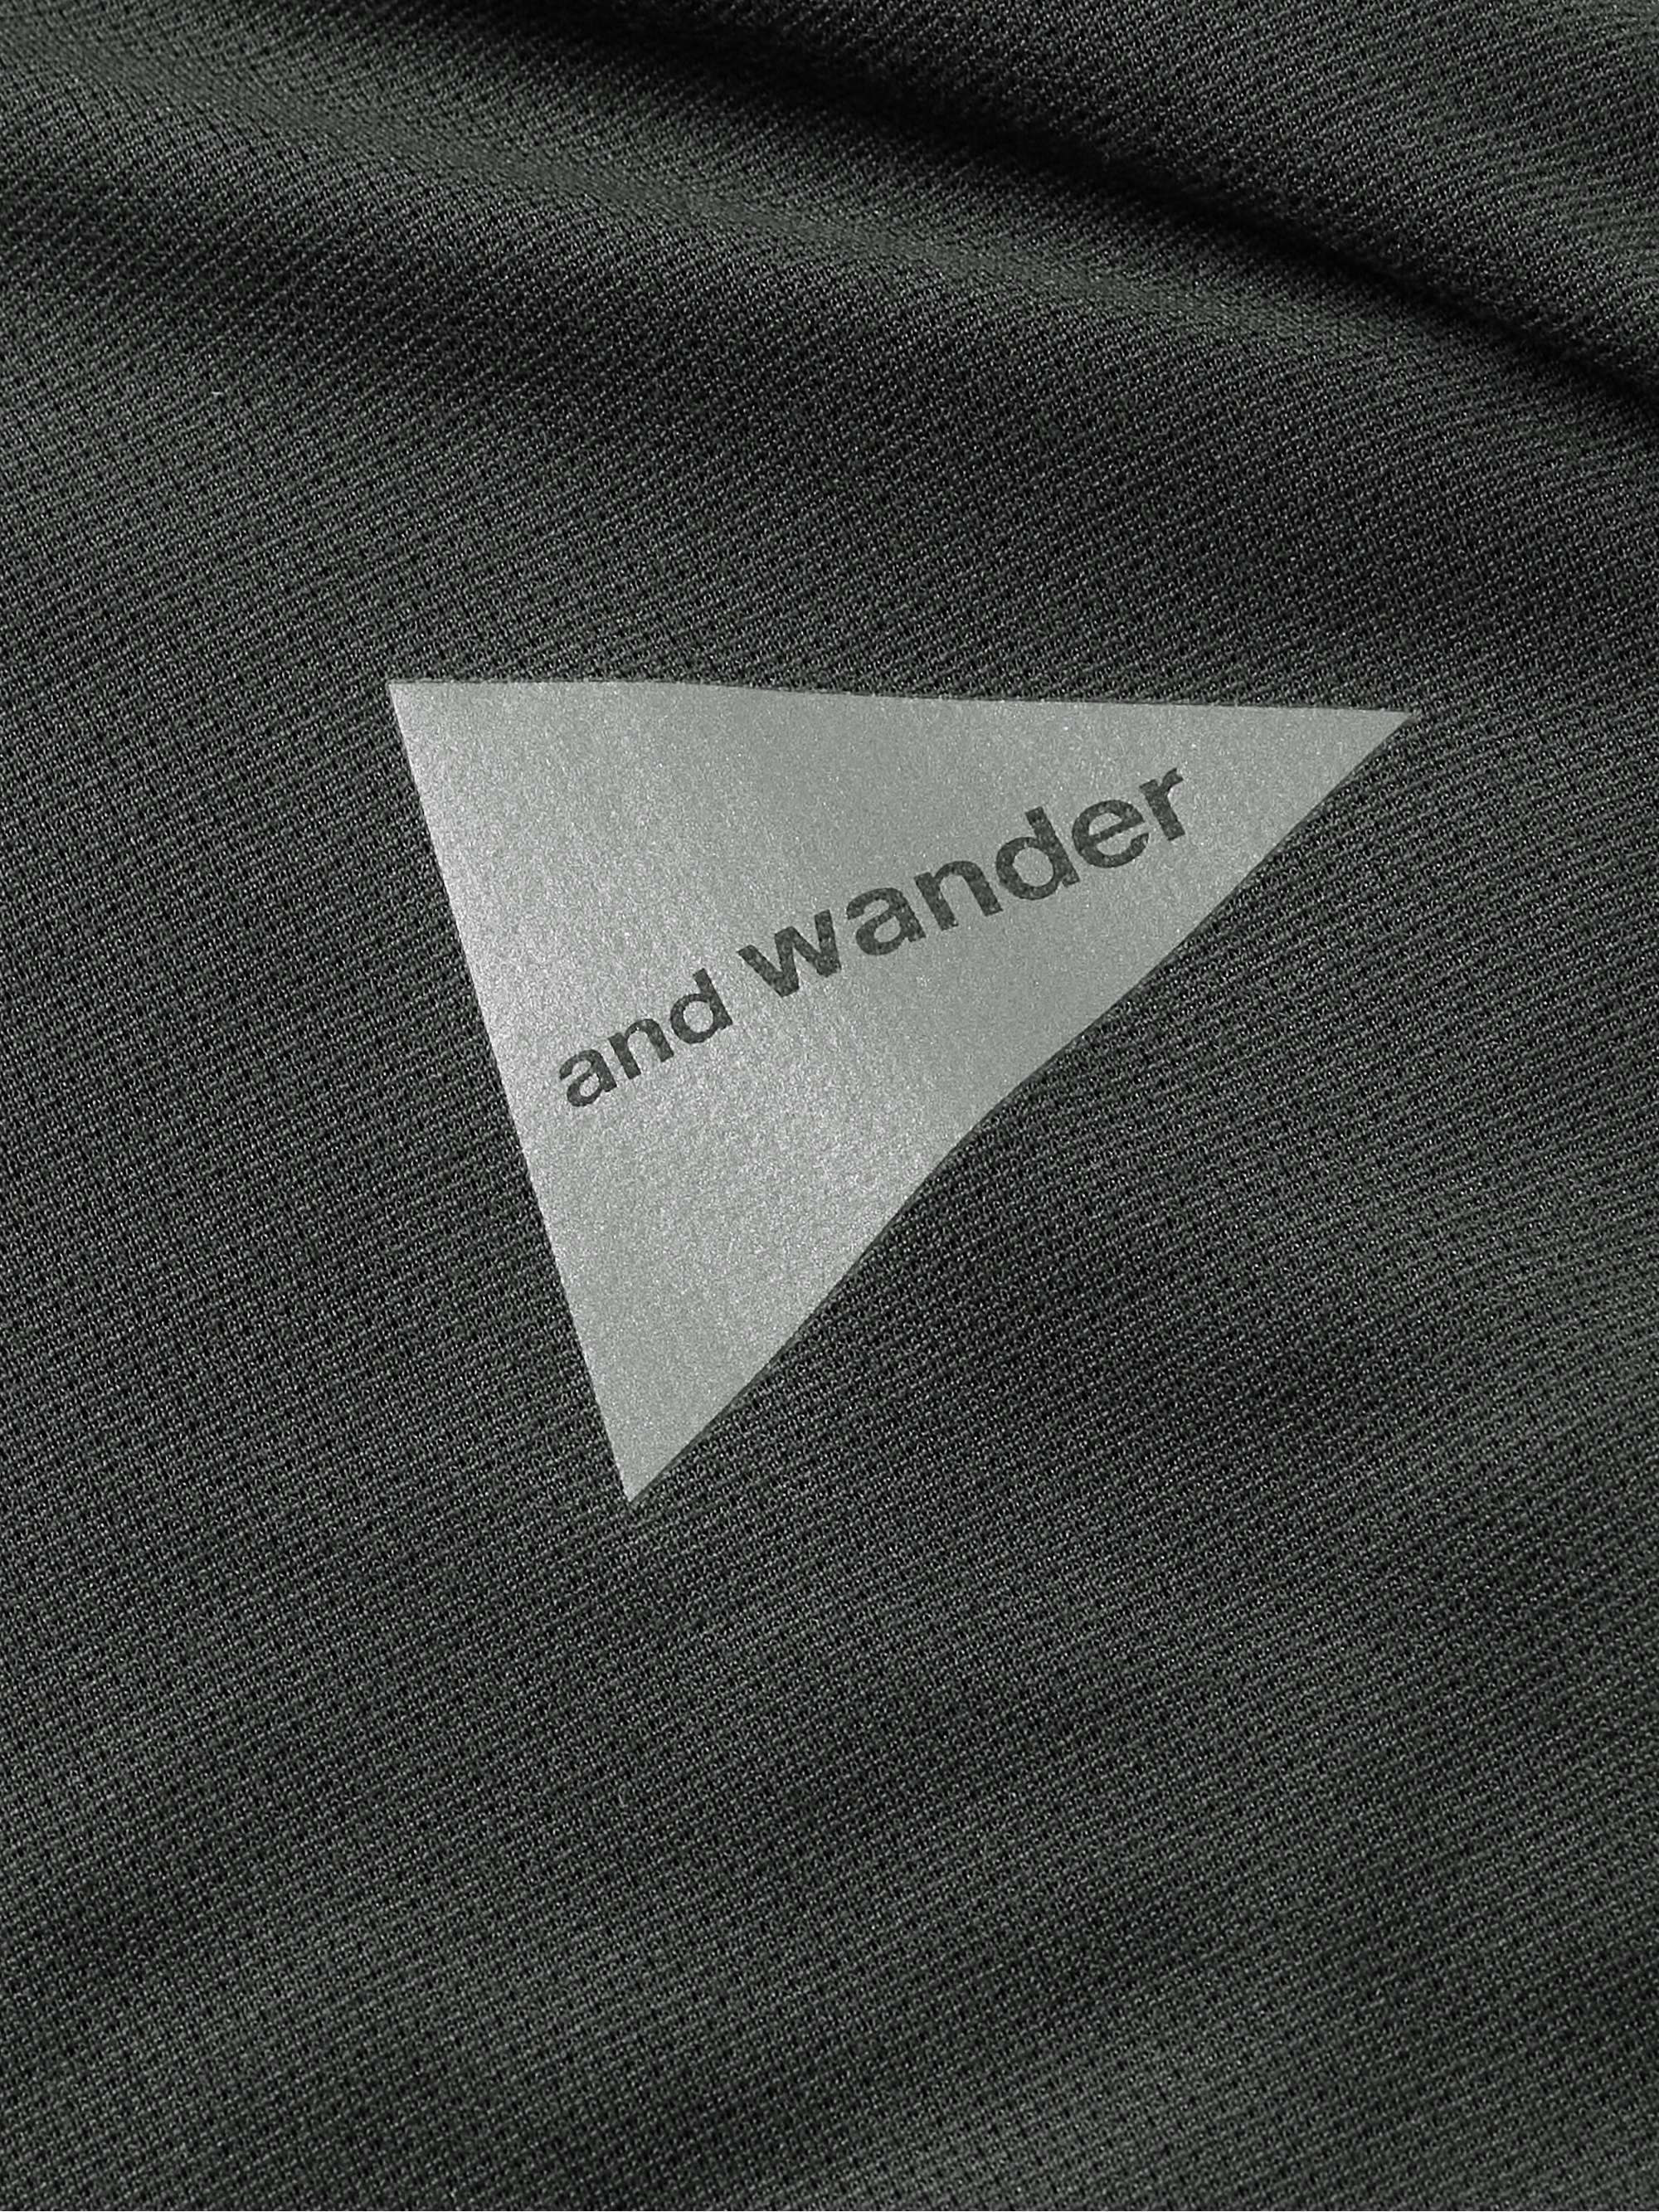 AND WANDER Polartec Power Dry Base Layer